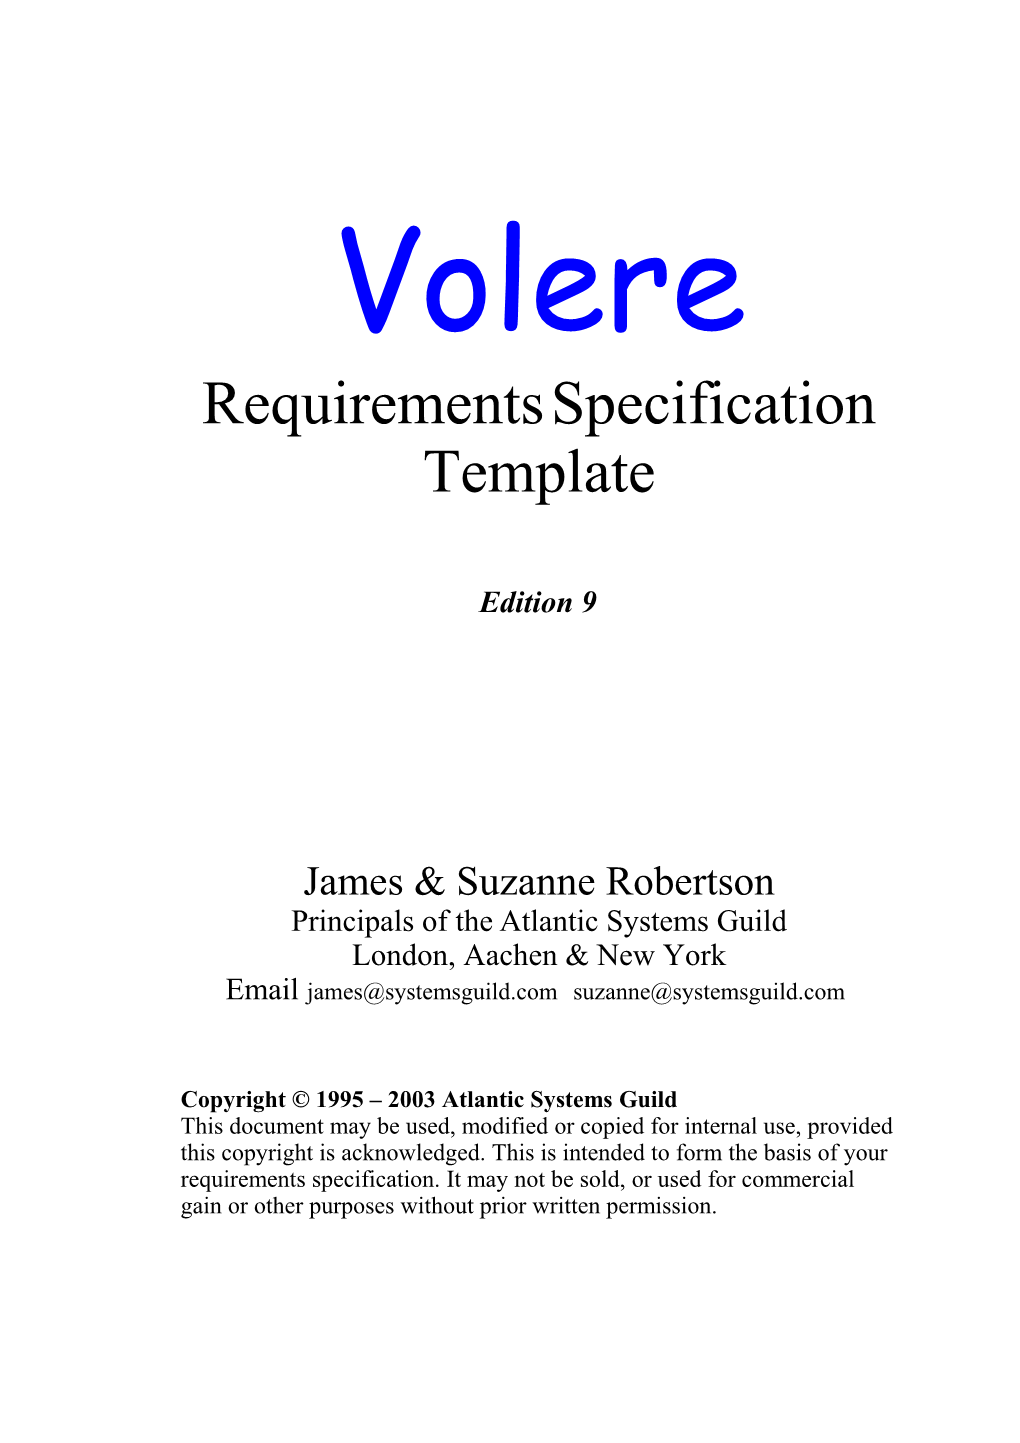 Requirements Specification Template s1